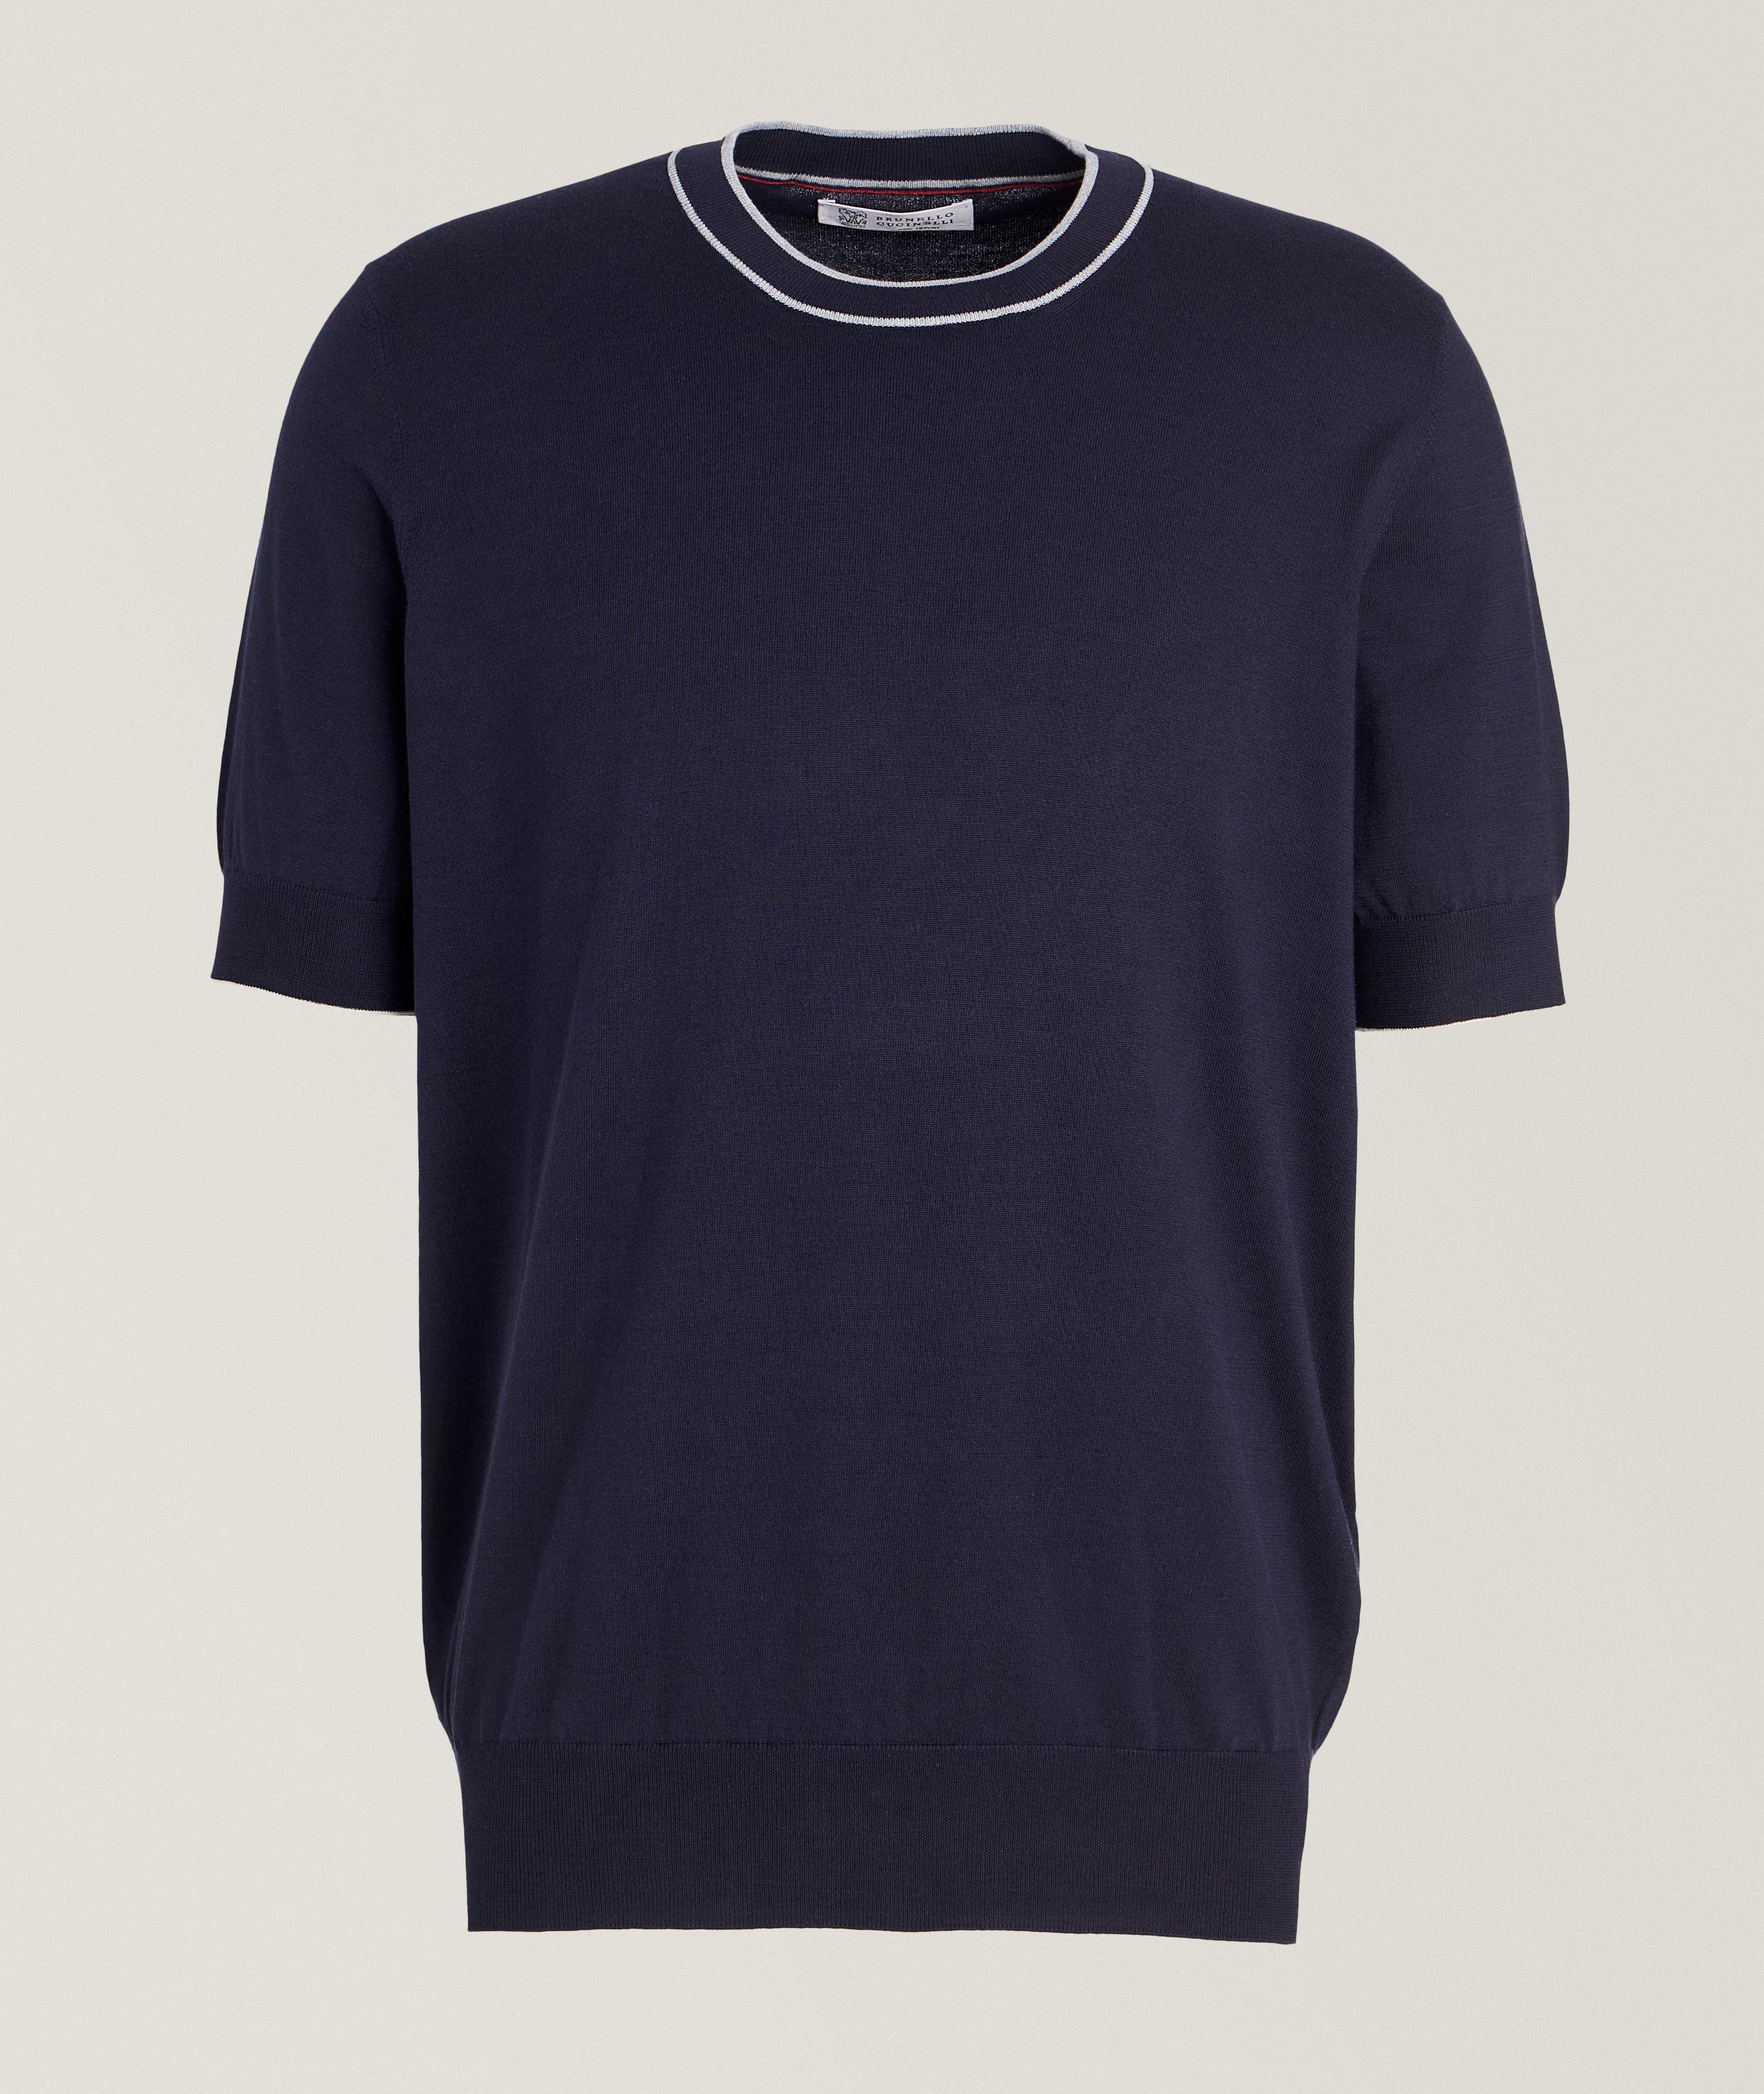 Contrast Tipped Cotton T-Shirt image 0